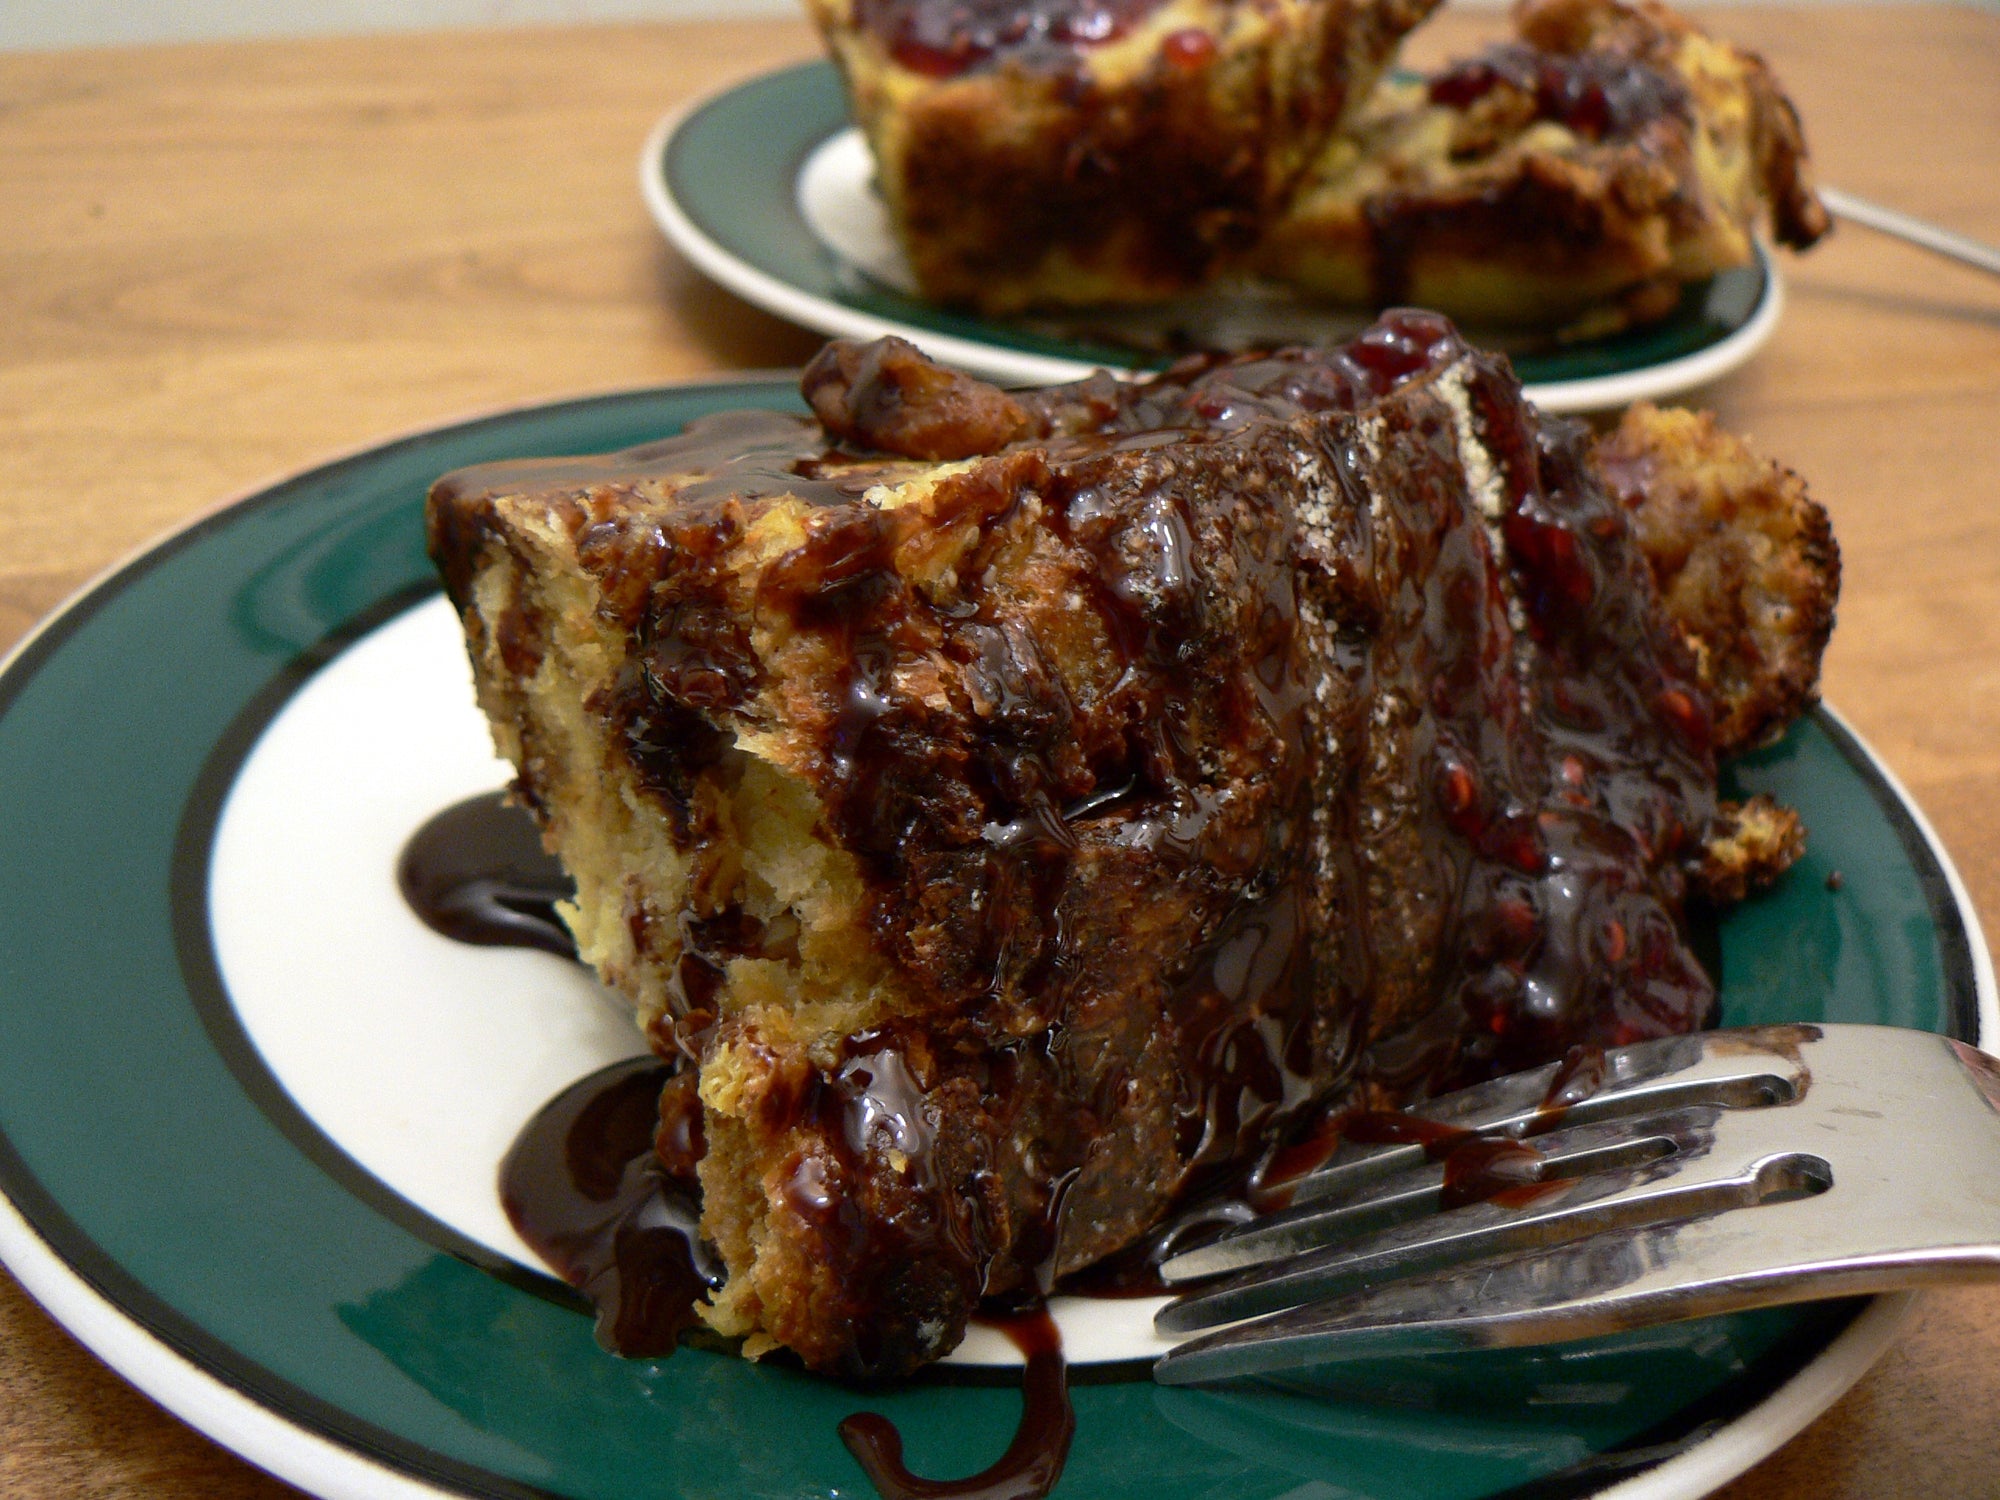 Cranberry Chocolate Bread Pudding with Classic Crème Anglaise